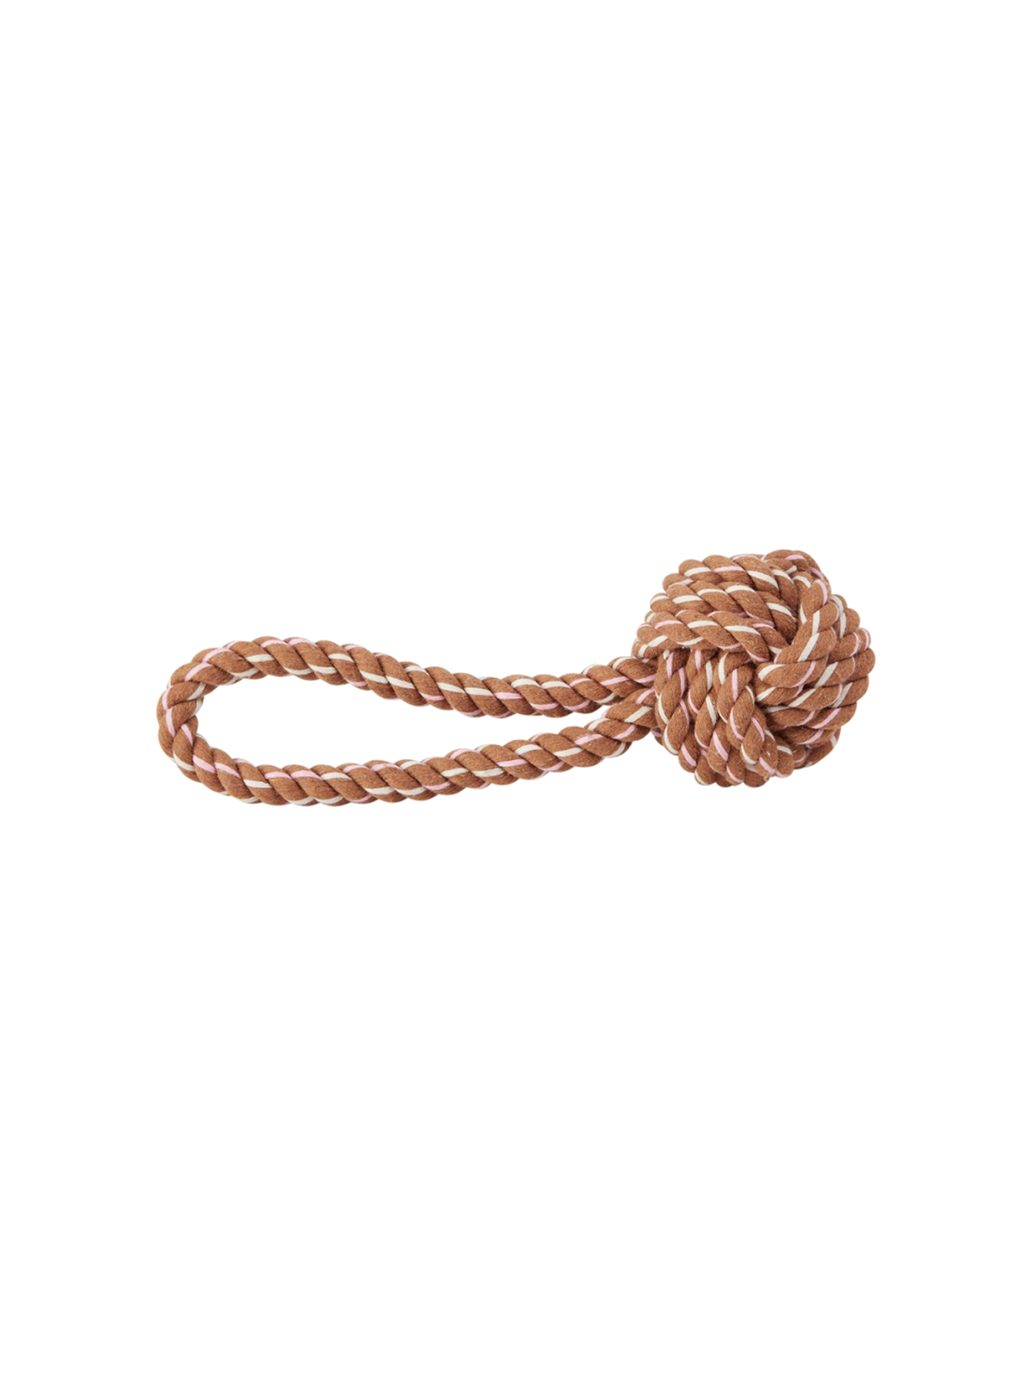 Otto Rope Dog Toy